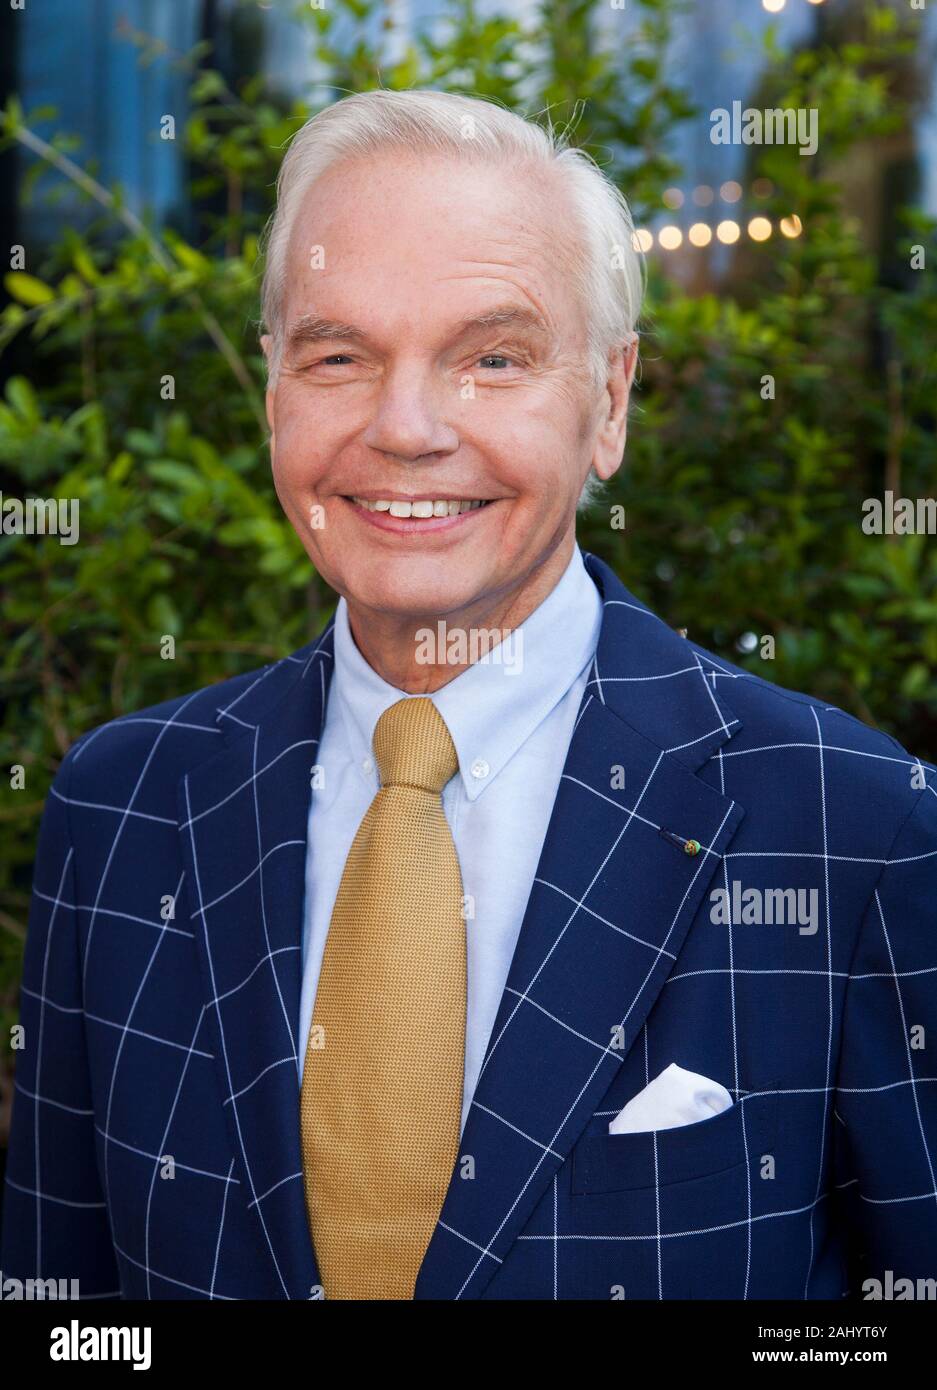 CARL JAN GRANQVIST Swedish restaurateur and television personality responsible for creating Måltidens hus and The restaurant school in Grythyttan Stock Photo